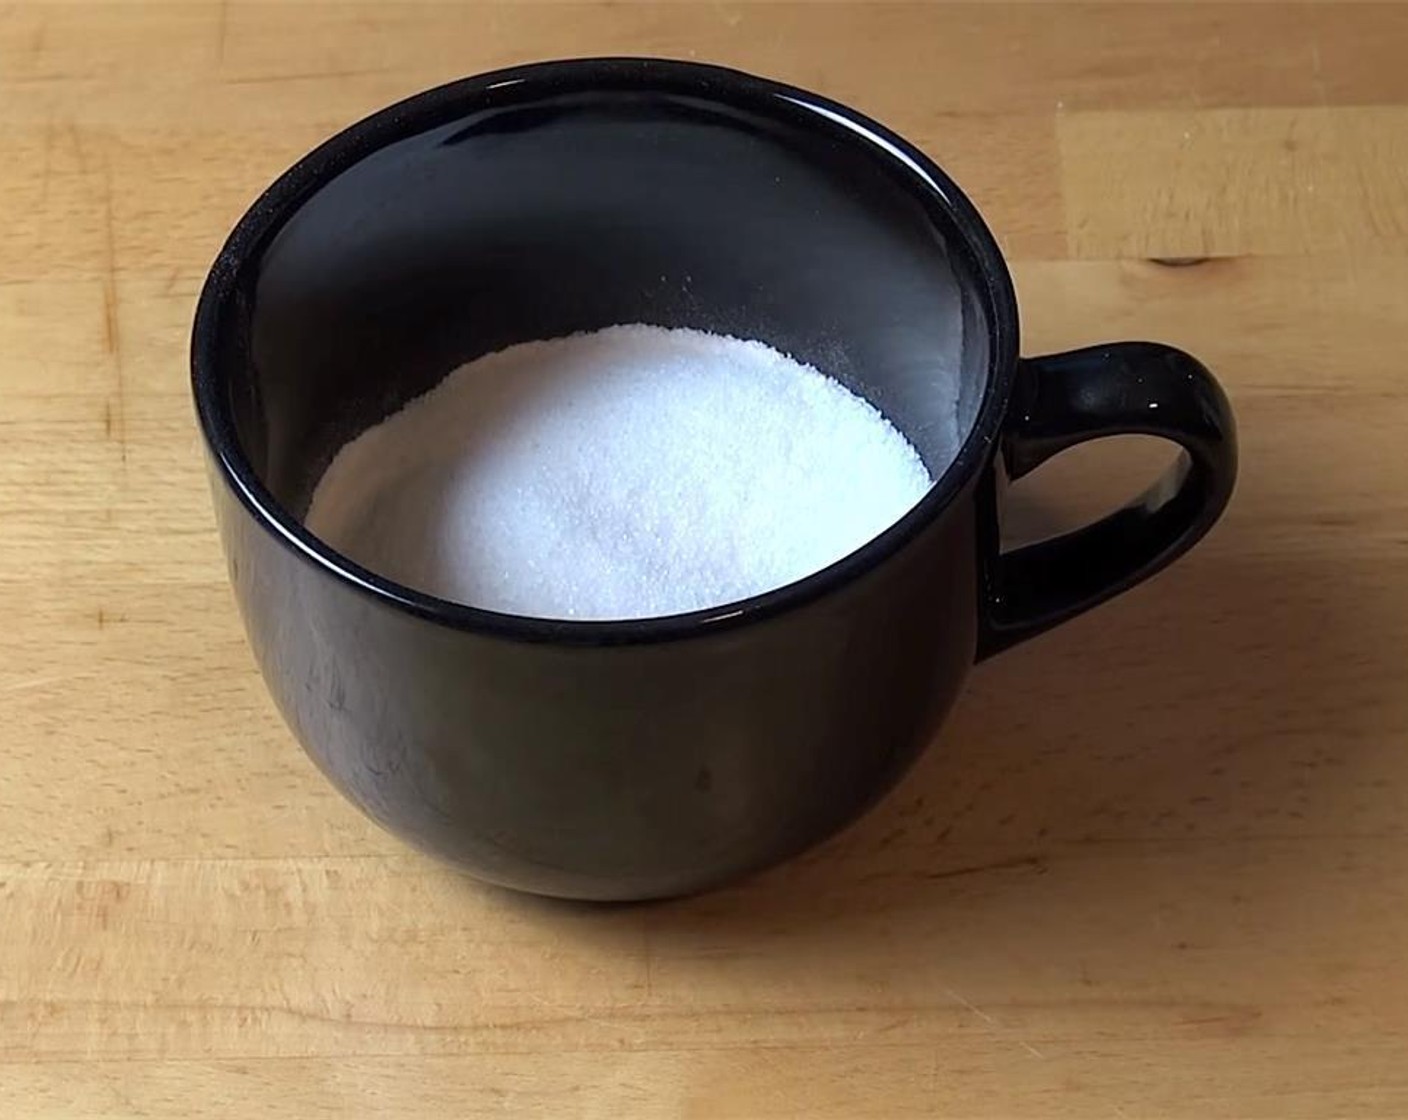 step 1 In an extra large mug, add Self-Rising Flour (1/4 cup) and Granulated Sugar (1/4 cup).